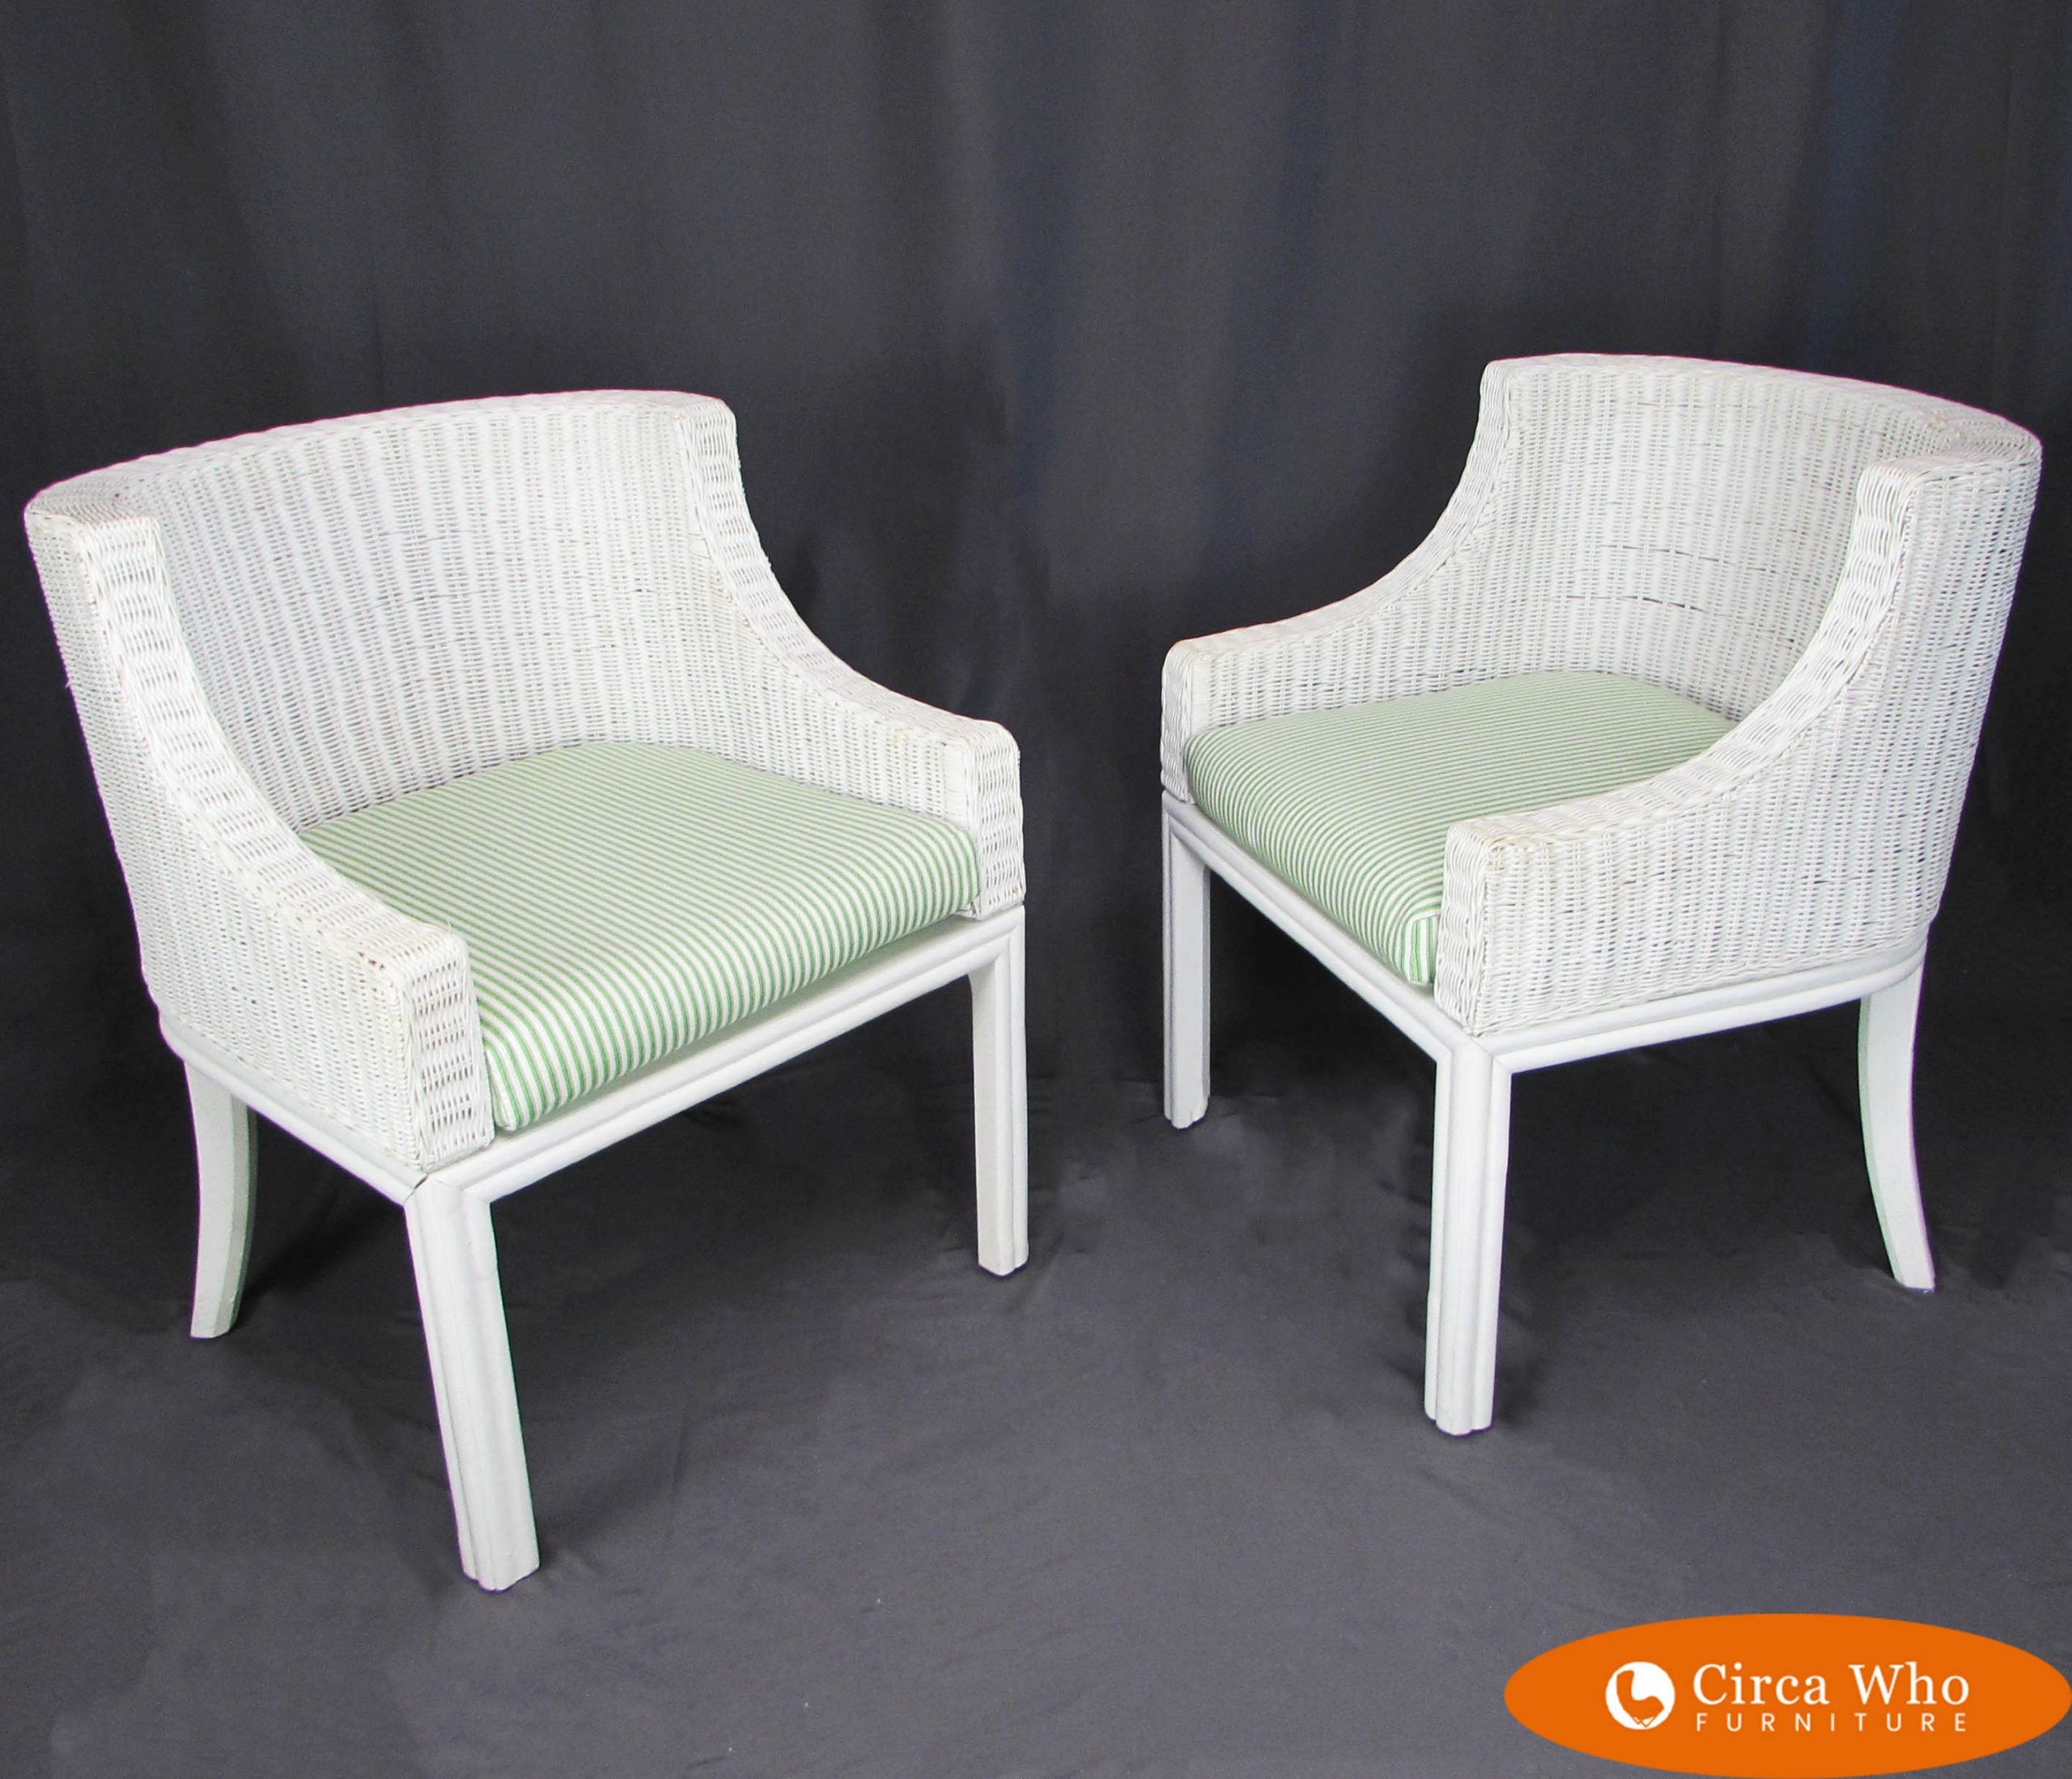 Pair of White Woven Rattan Chairs Circa Who